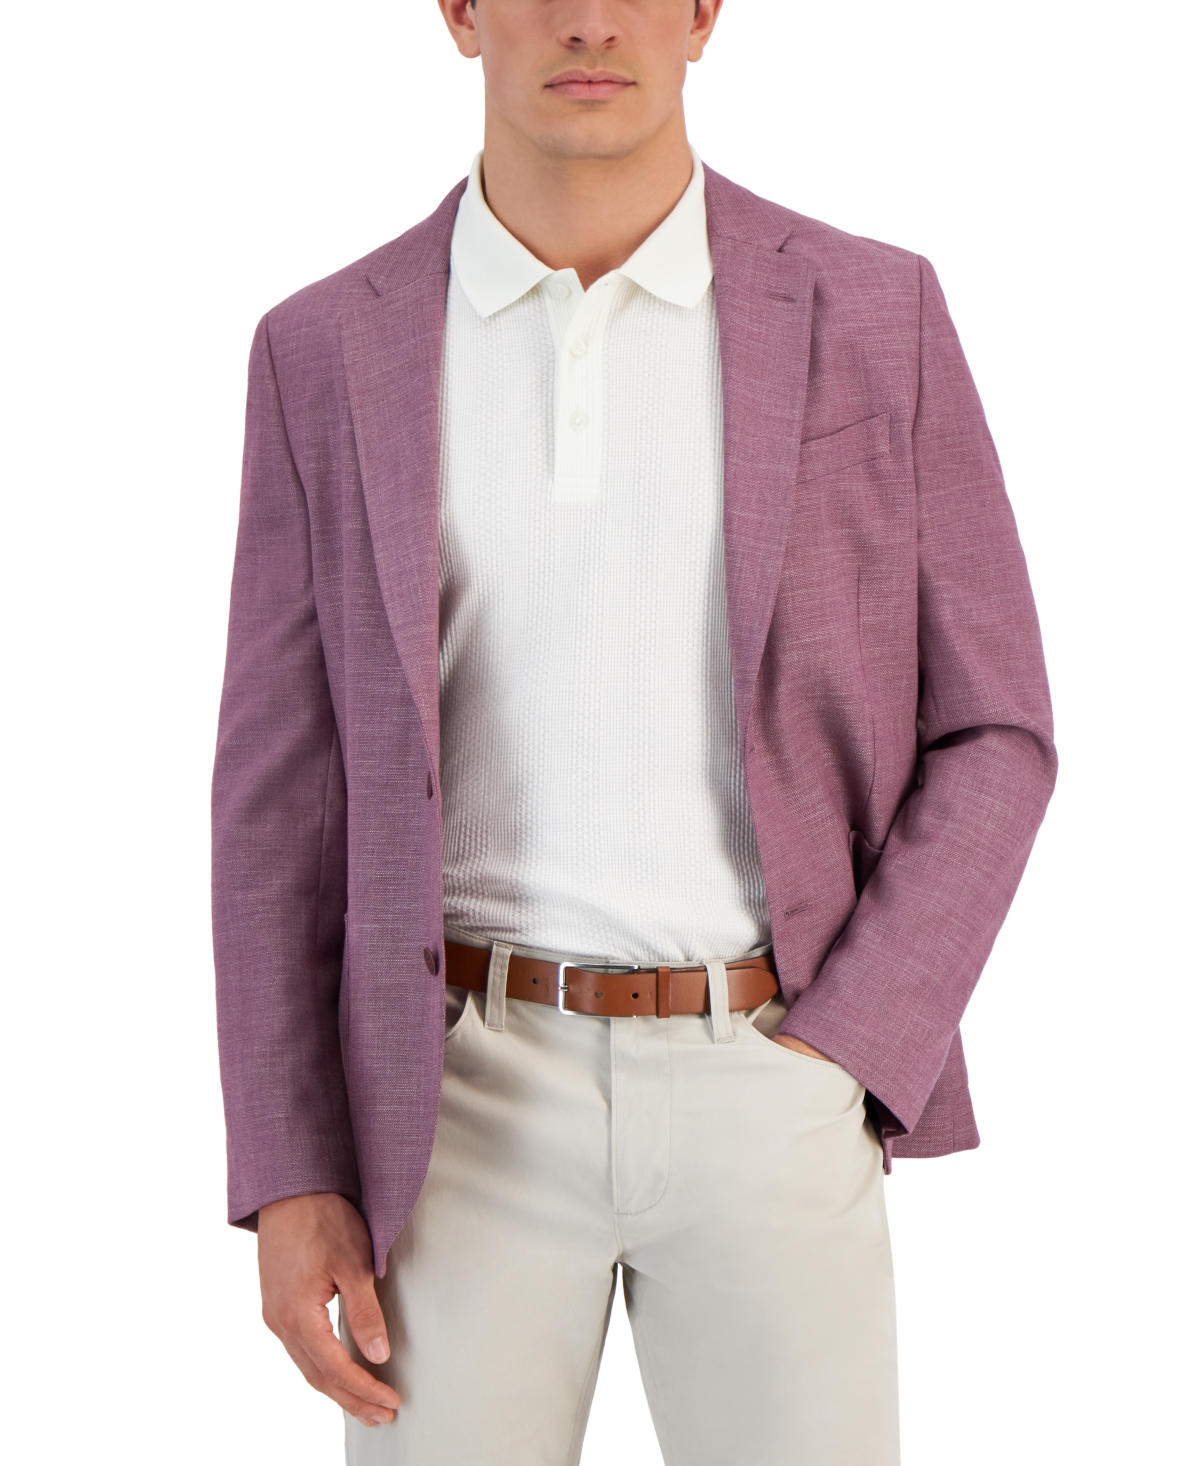 Men’s Vintage Style Suits, Classic Suits Nautica Mens Modern-Fit Active Stretch Woven Solid Sport Coat - Solid Pink $295.00 AT vintagedancer.com